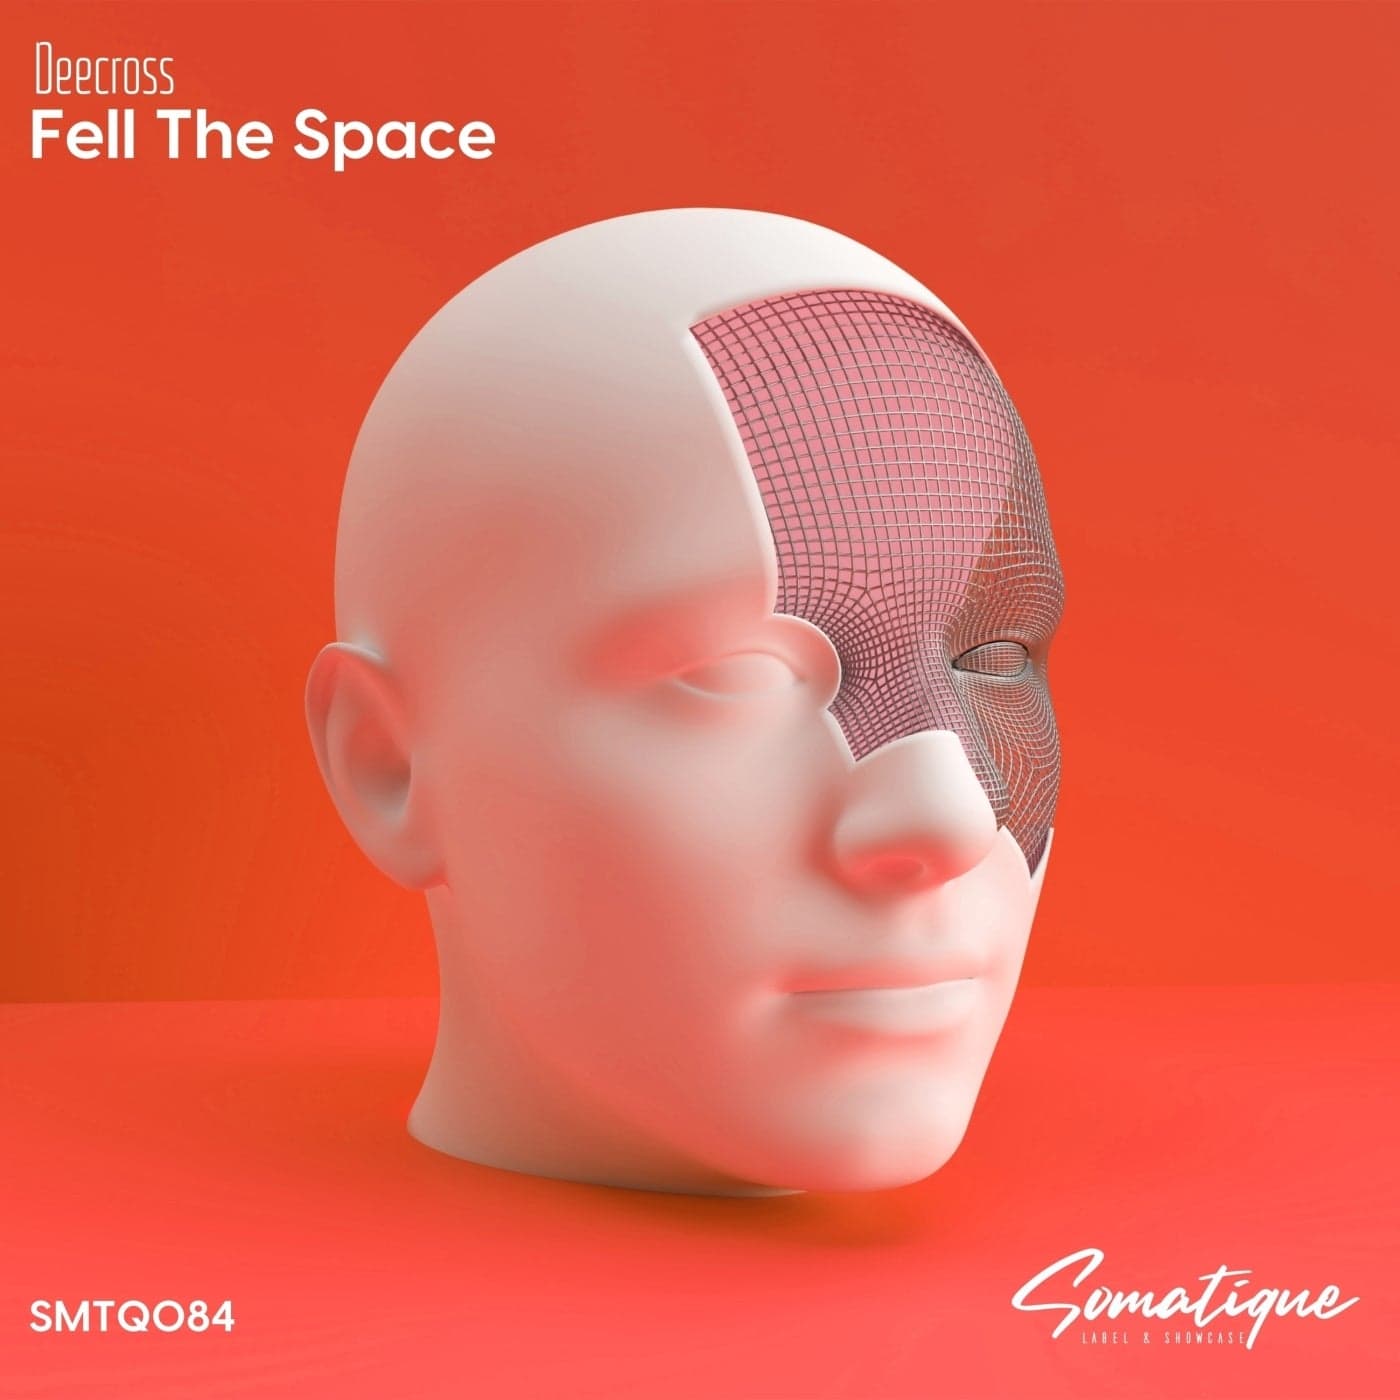 image cover: Deecross - Fell the Space / SMTQ084